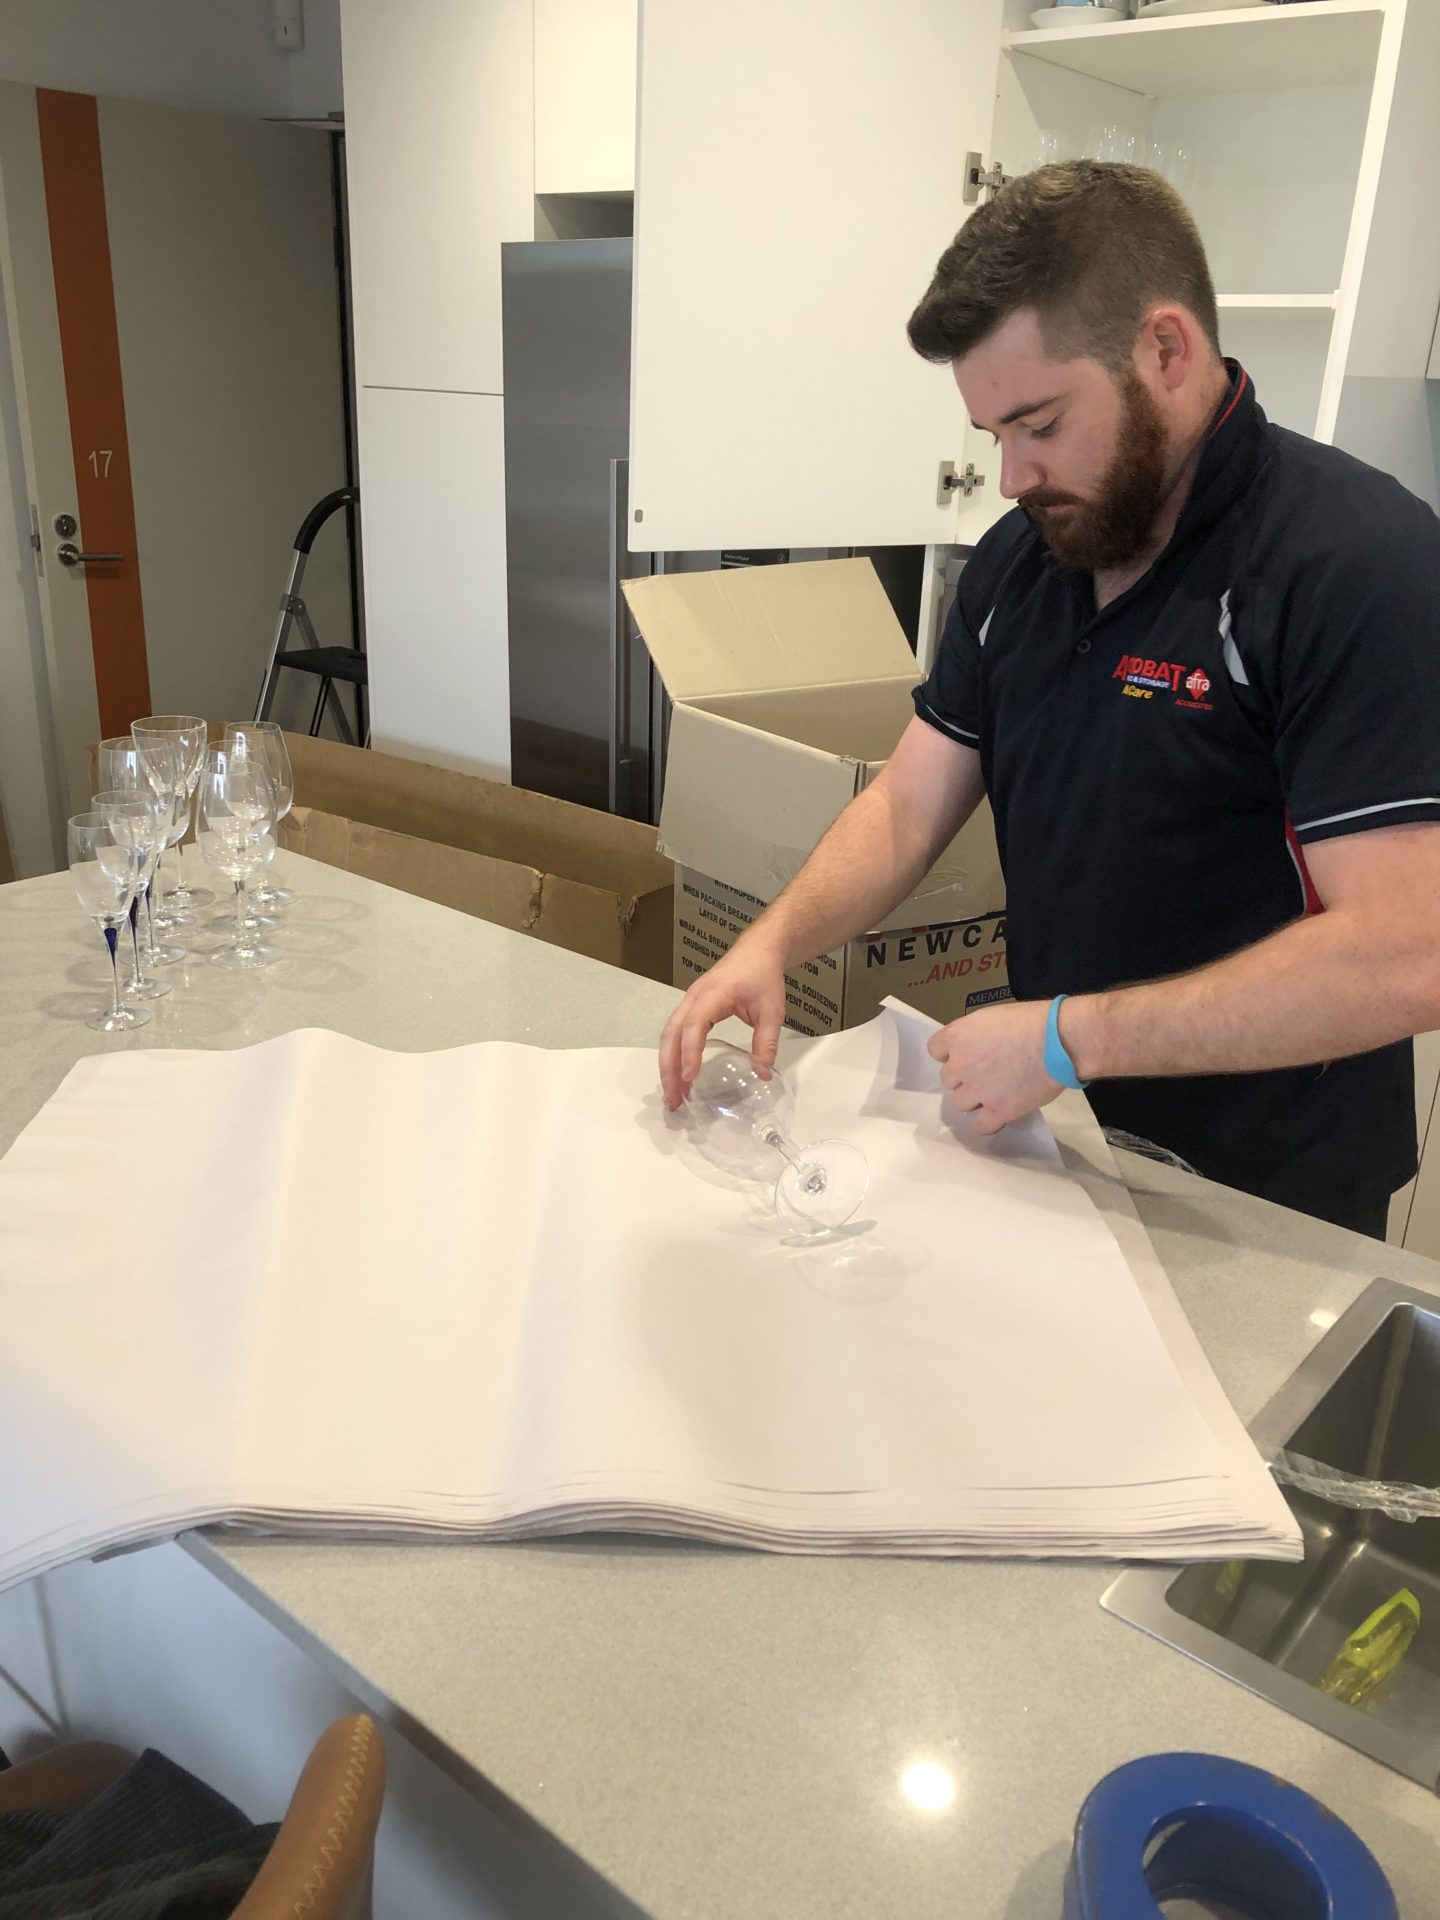 packing materials, Packing Materials, Acrobat Removals &amp; Storage